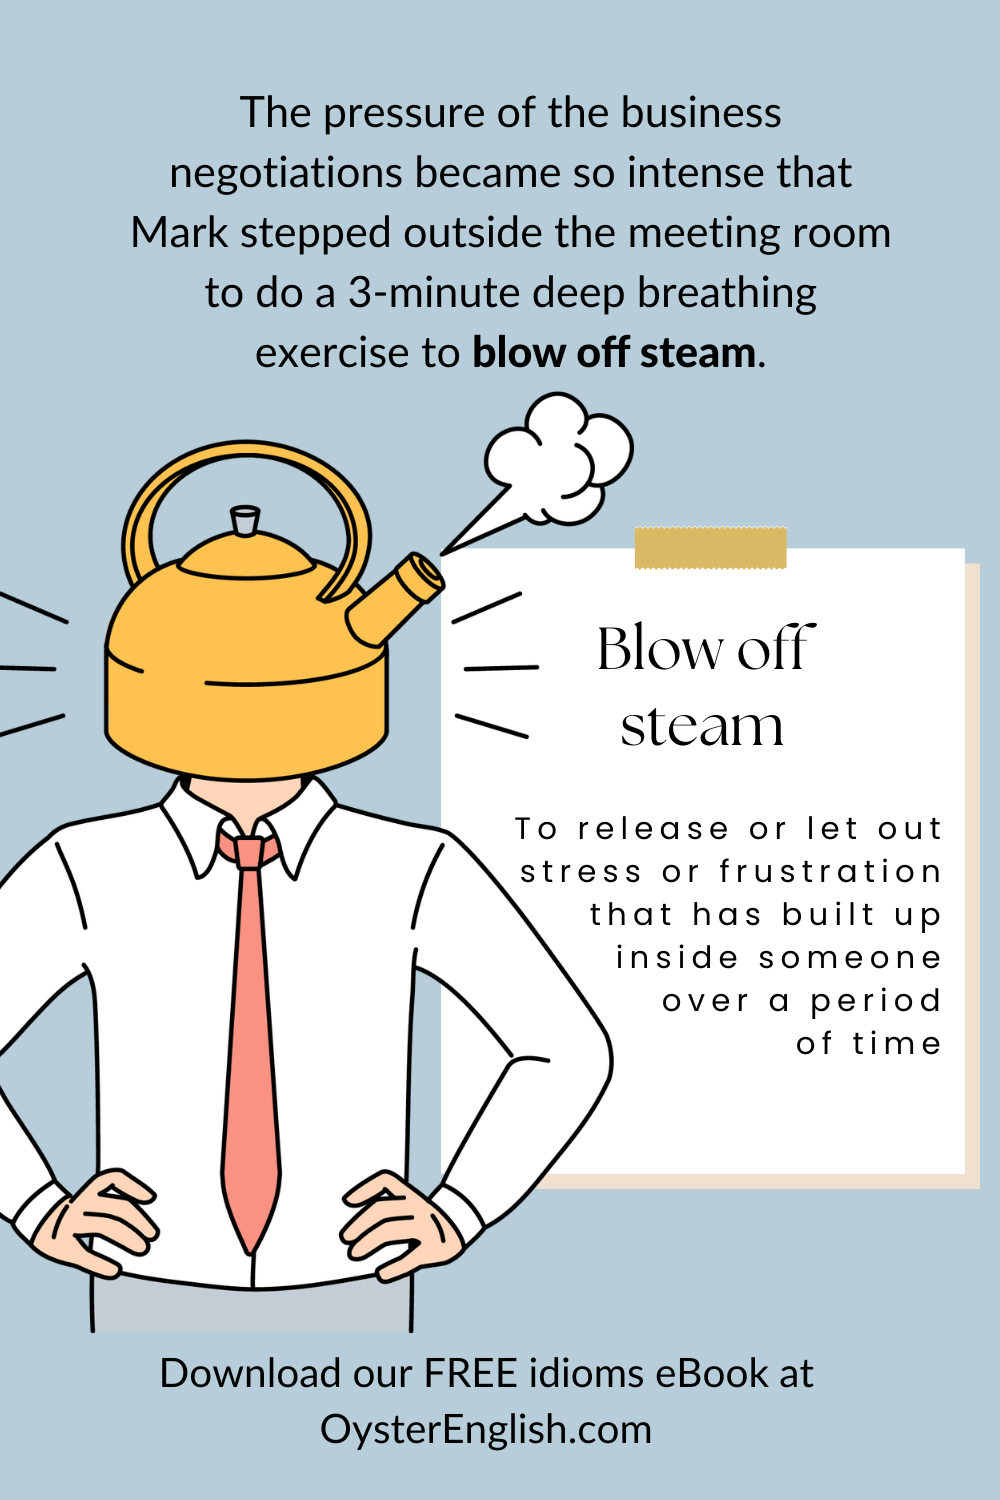 The image shows a businessman with a hot water kettle instead of his head. Hot steam escapes from the kettle, illustrating the concept of the idiom blow off steam. "The pressure of the business negotiations became so intense that Mark stepped outside the meeting room to do a 3-minute deep breathing exercise to blow off steam."